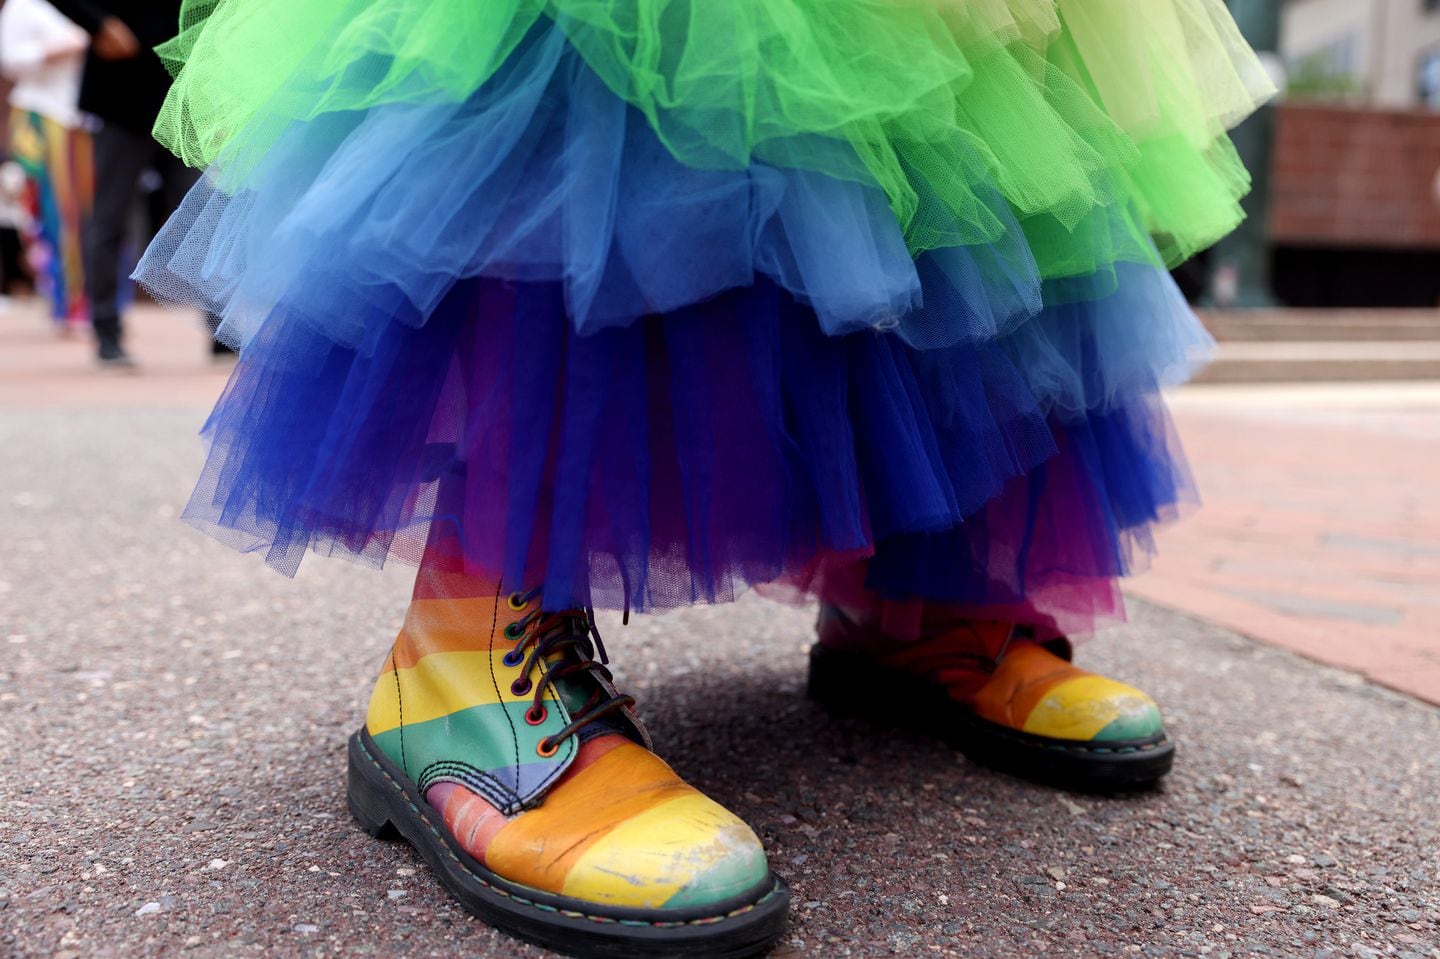 Leslie Rosenberg of Boston sported a pair of rainbow boots to match her rainbow skirt at a Pride flag raising at Boston City Hall on June 3.